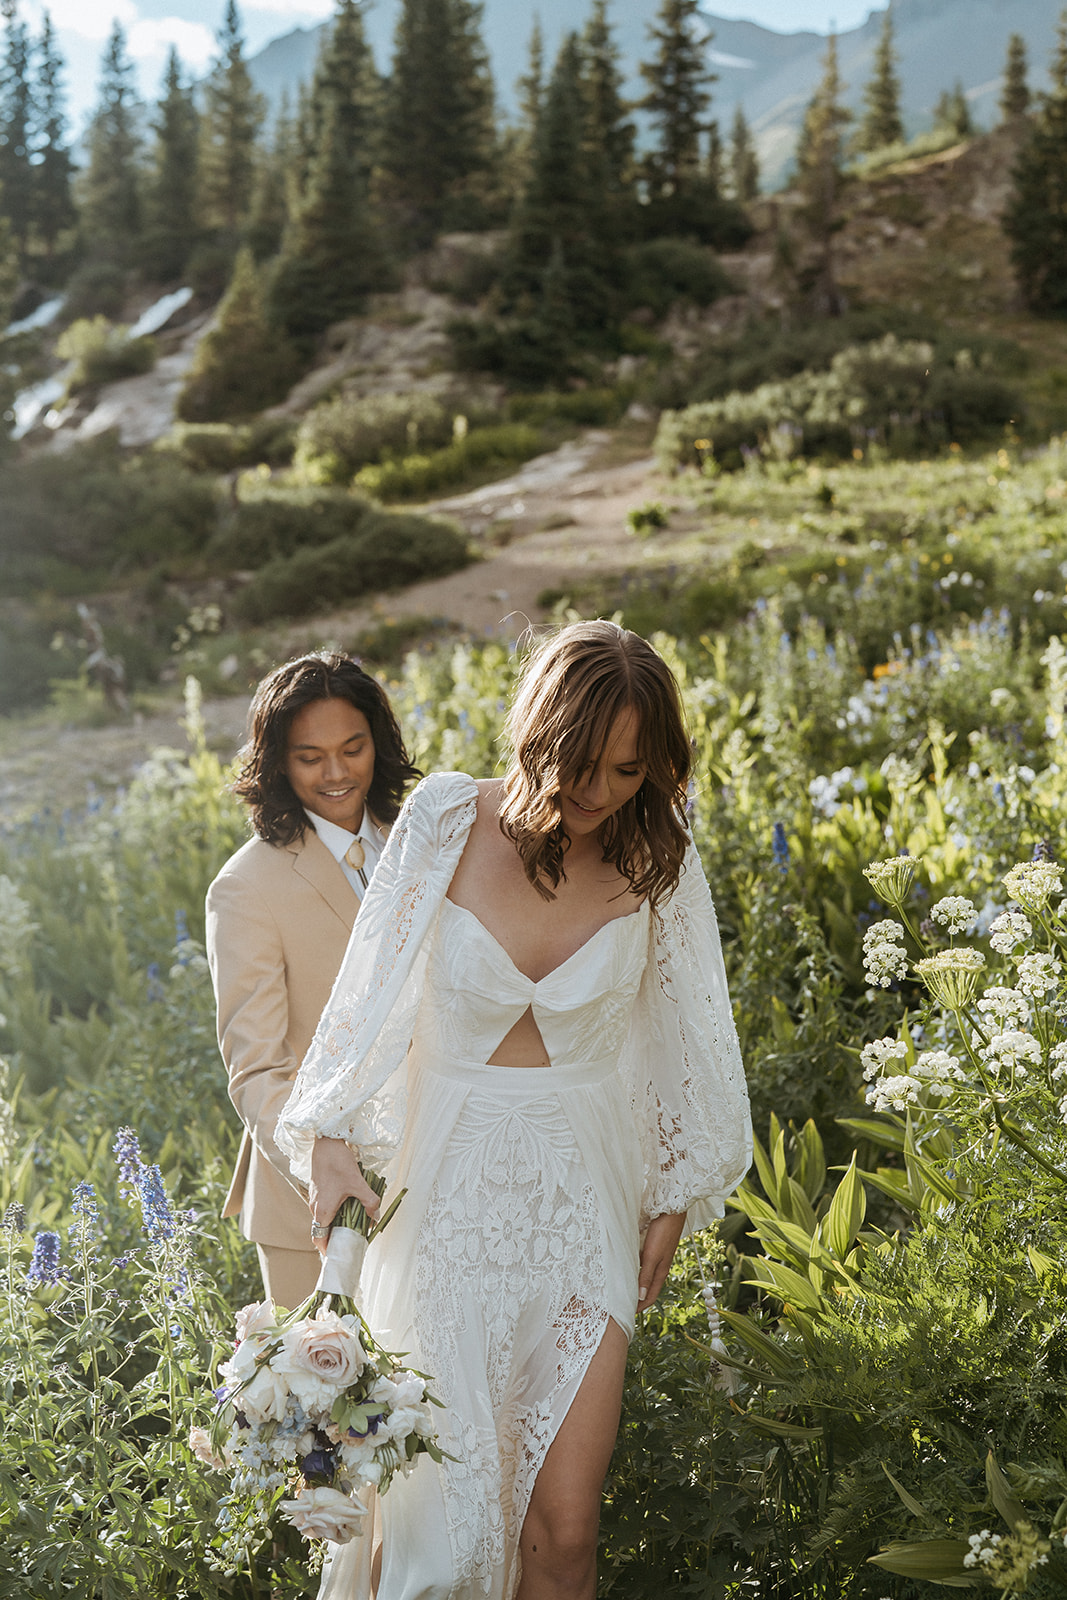 Newlyweds walk up a mountain trail surrounded by wildflowers at sunset